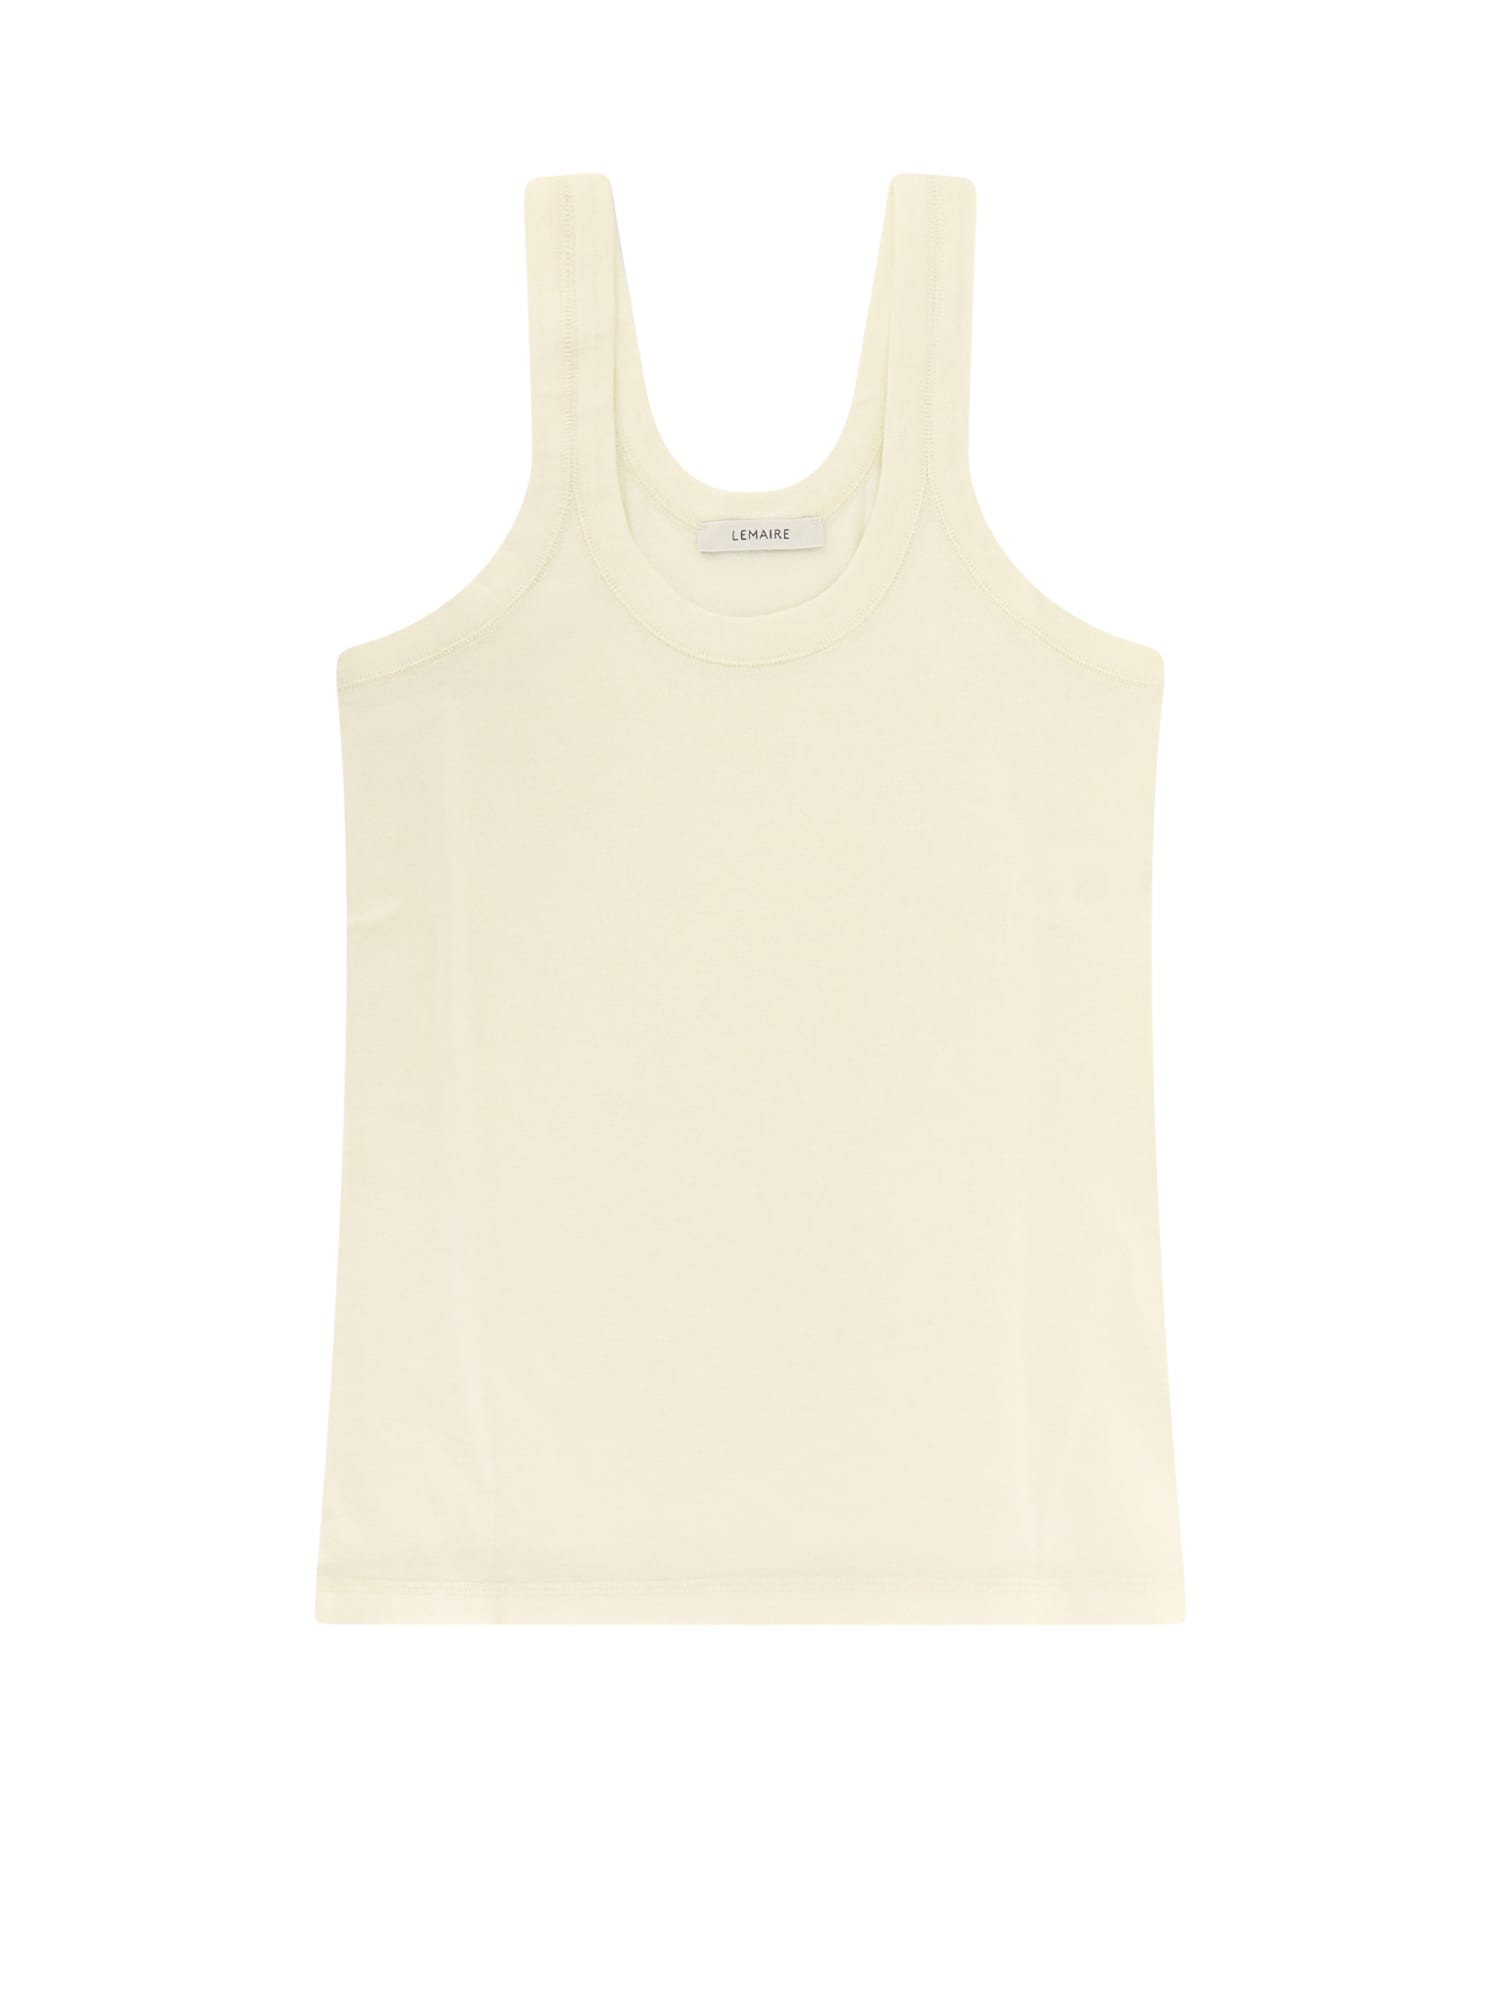 Lemaire Tank Top